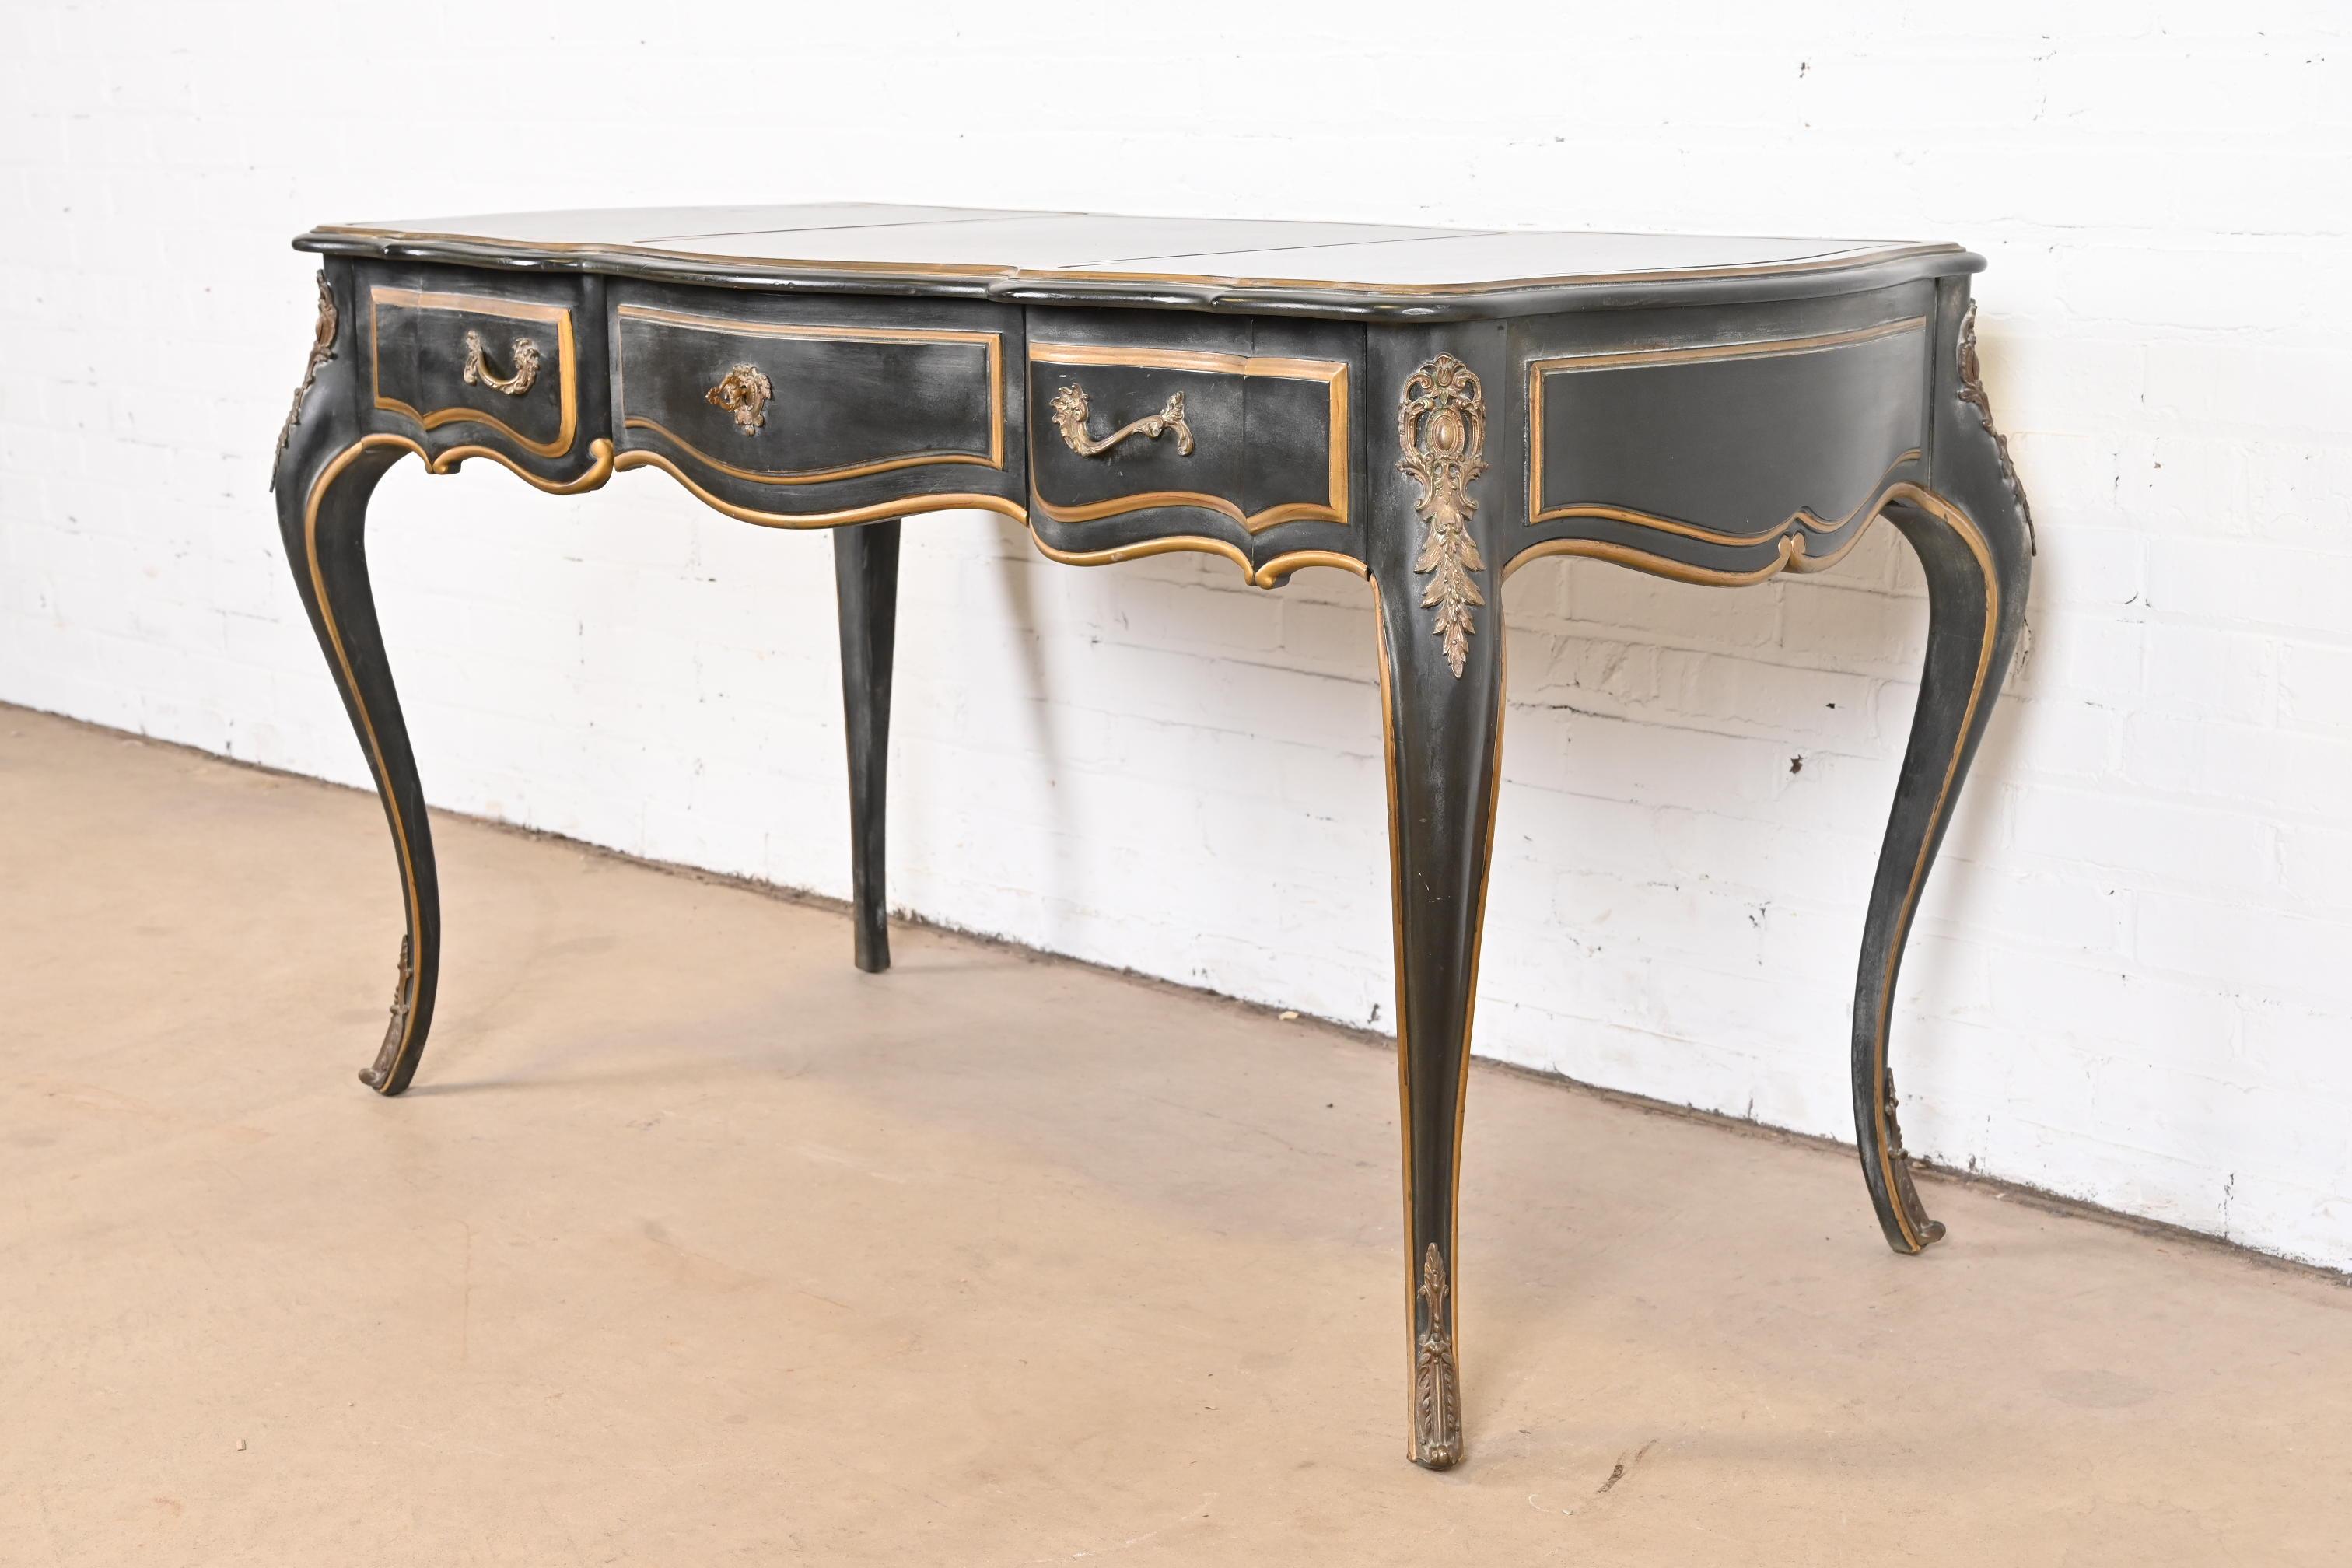 Mid-20th Century French Louis XV Bureau Plat Desk with Ormolu and Faux Marble Top by Drexel